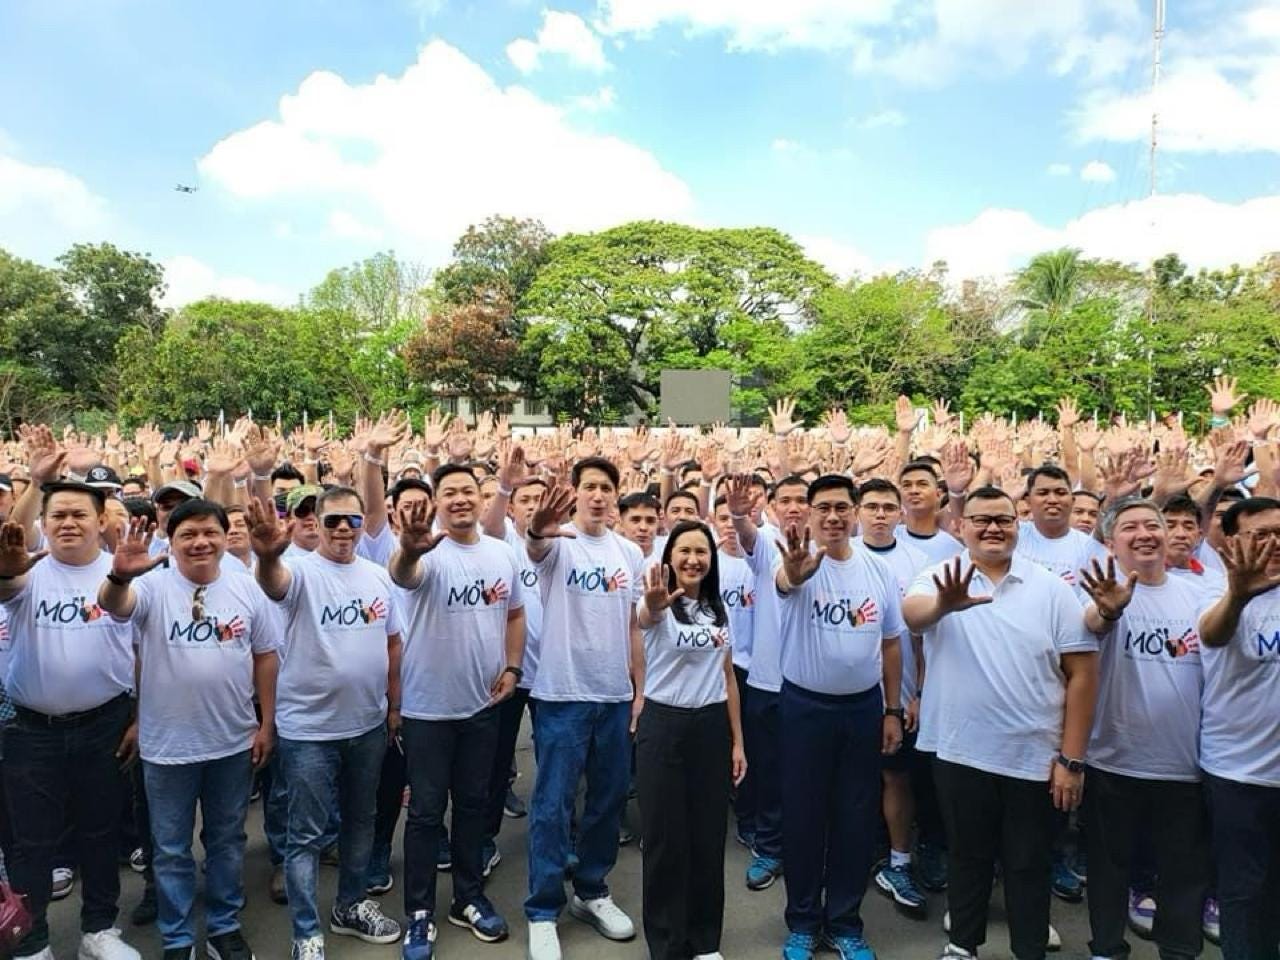 Quezon City Mayor Joy Belmonte and Vice Mayor Gian Sotto lead the 10,000 men in their pledge against violence against women in this undated contributed photo.